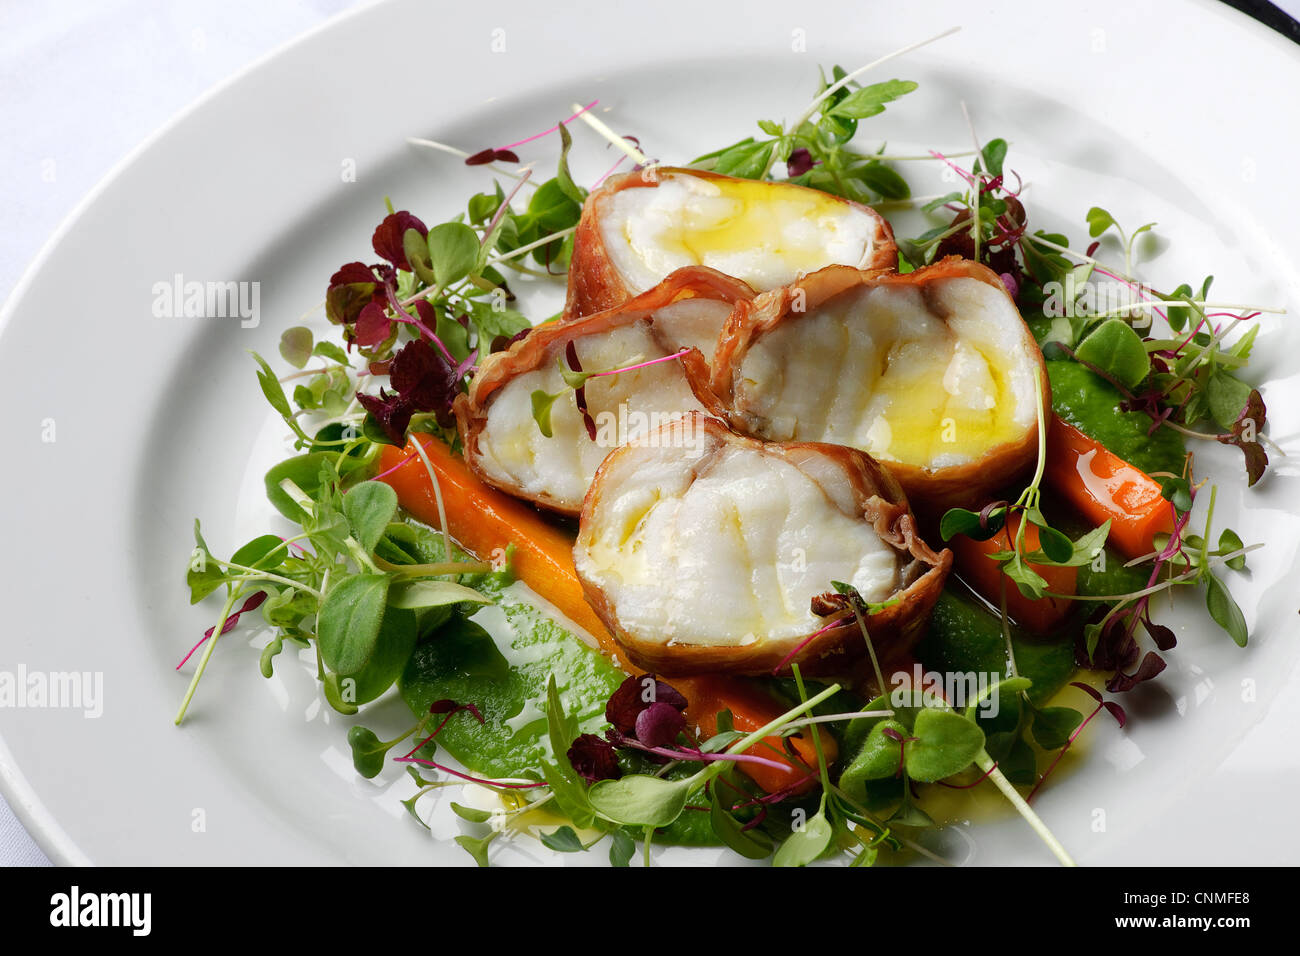 white plate on restaurant table of fish salad Stock Photo